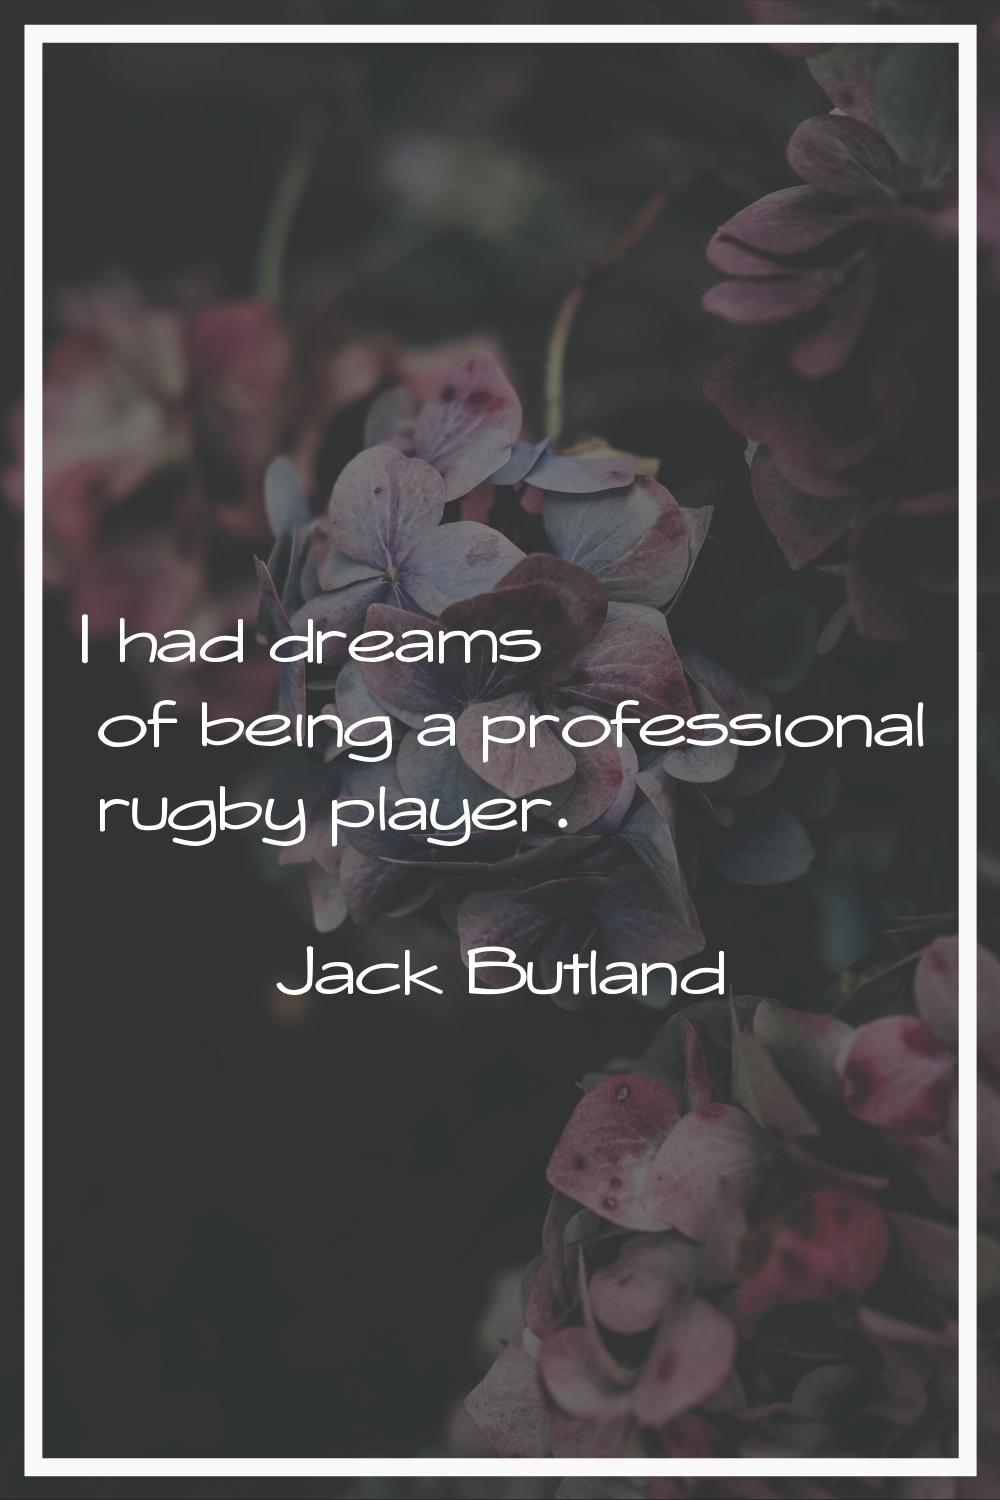 I had dreams of being a professional rugby player.